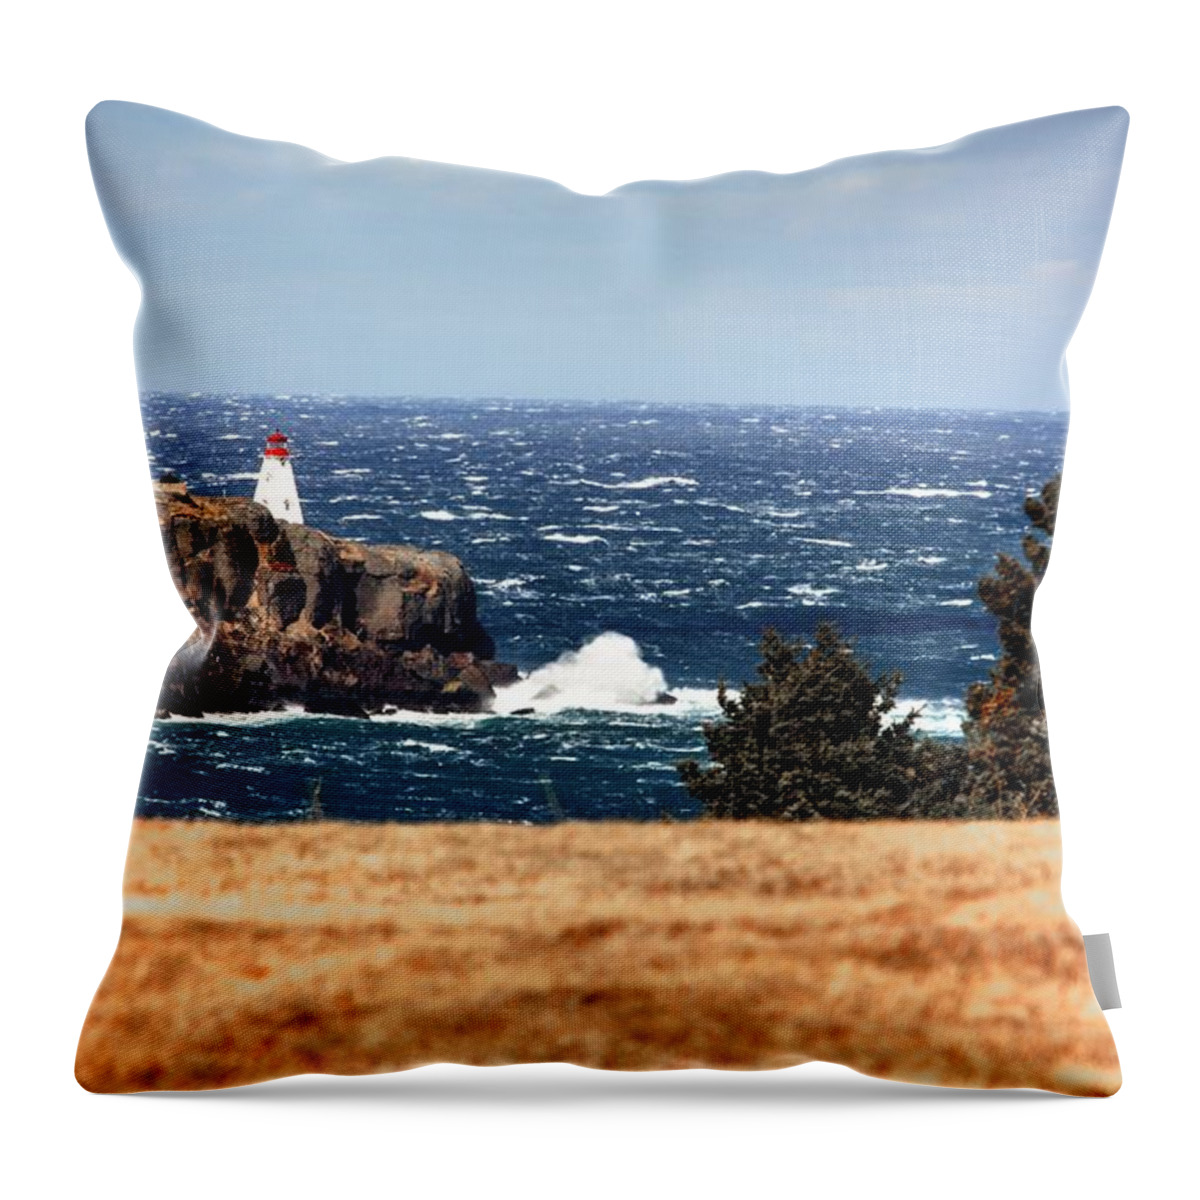 Boars Head Lighthouse The Bay Of Fundy Storm Gale Sea Ocean Waves Rocks Windy Waves Rough Petit Passage Ferry Throw Pillow featuring the photograph Head Land by David Matthews